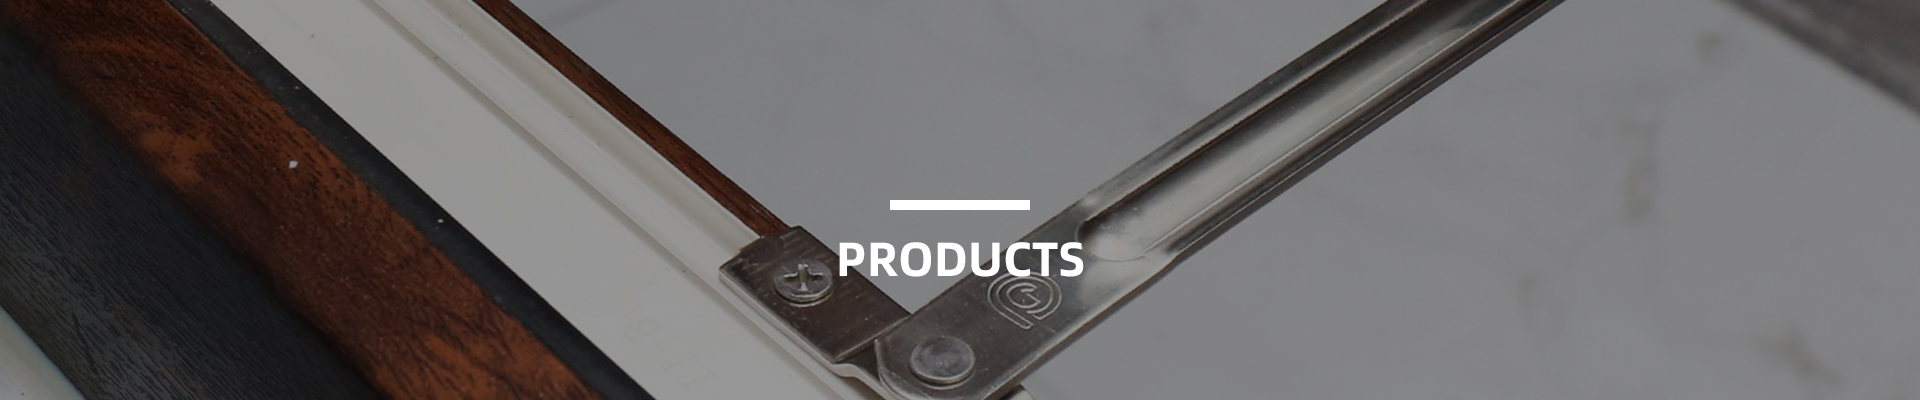 Products-banner